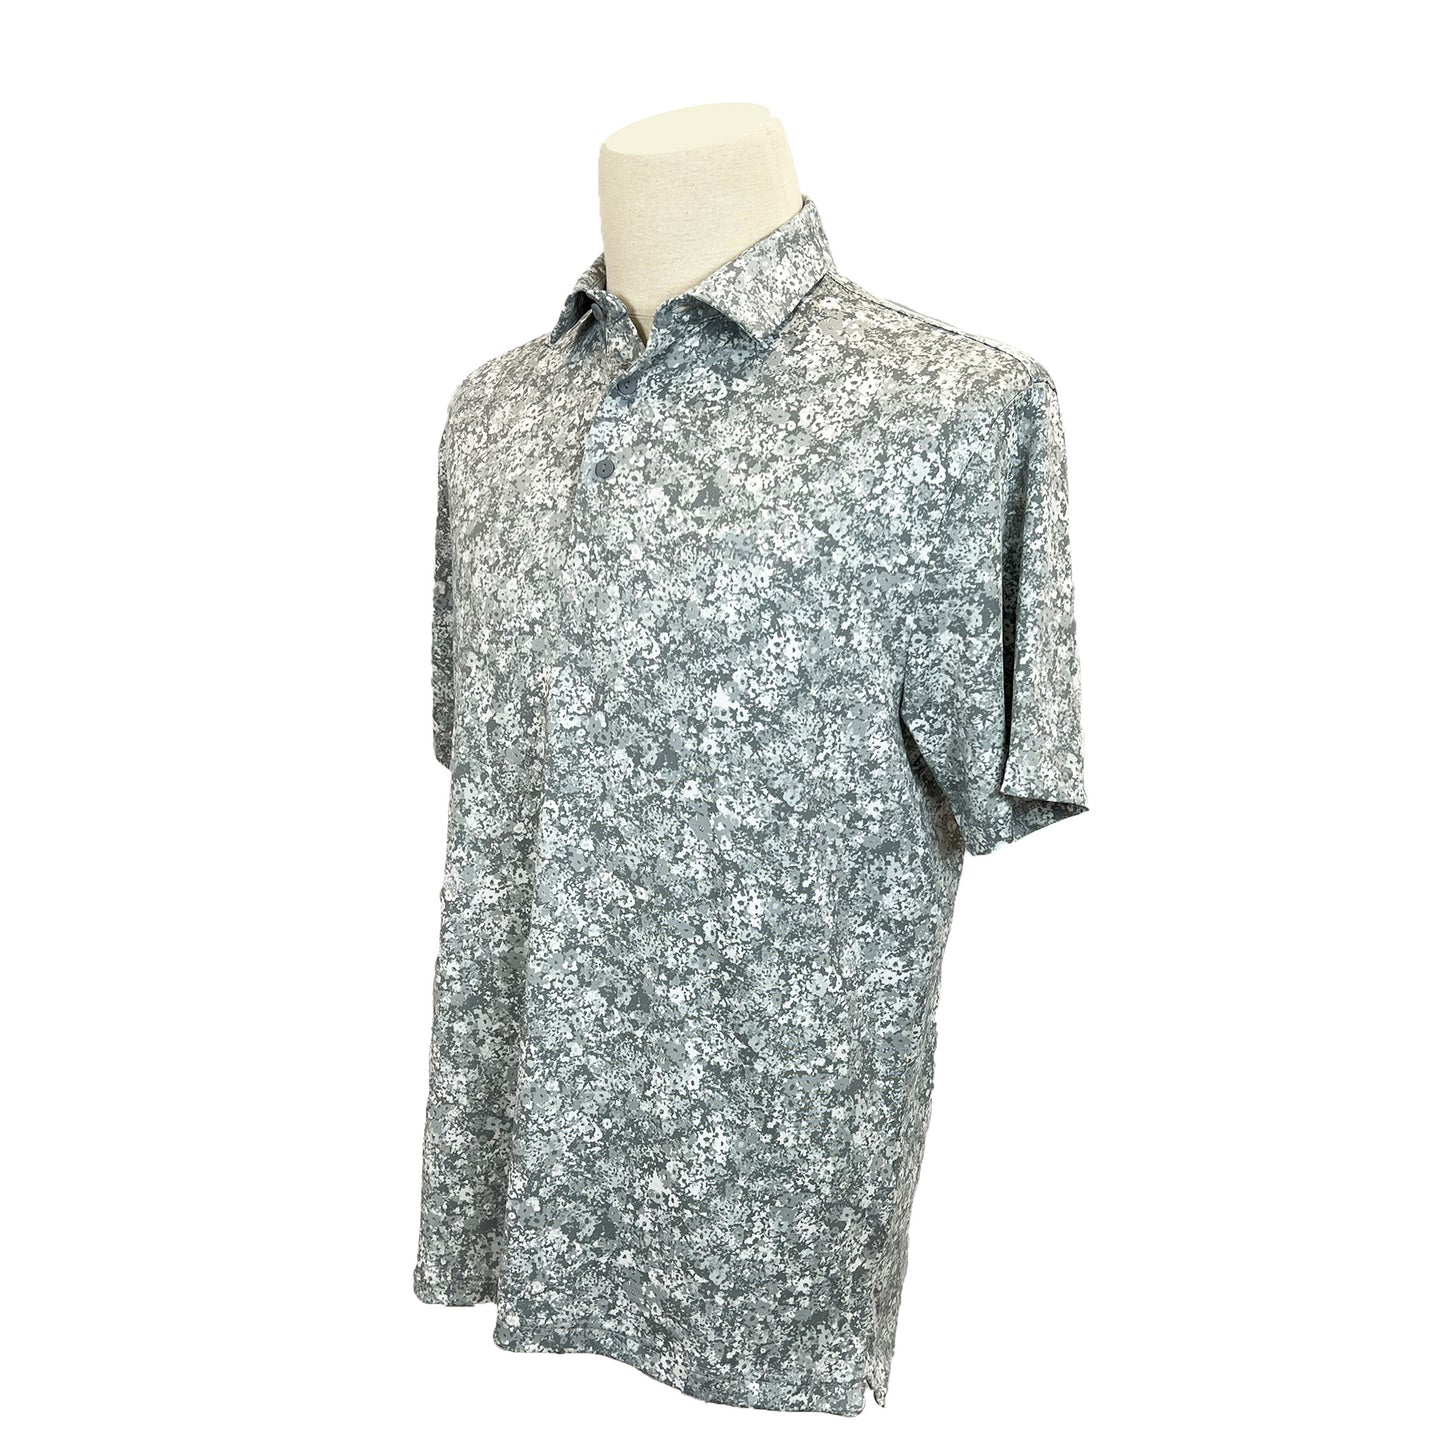 Under Armour Men's Playoff 3.0 Floral Speckle Print Polo